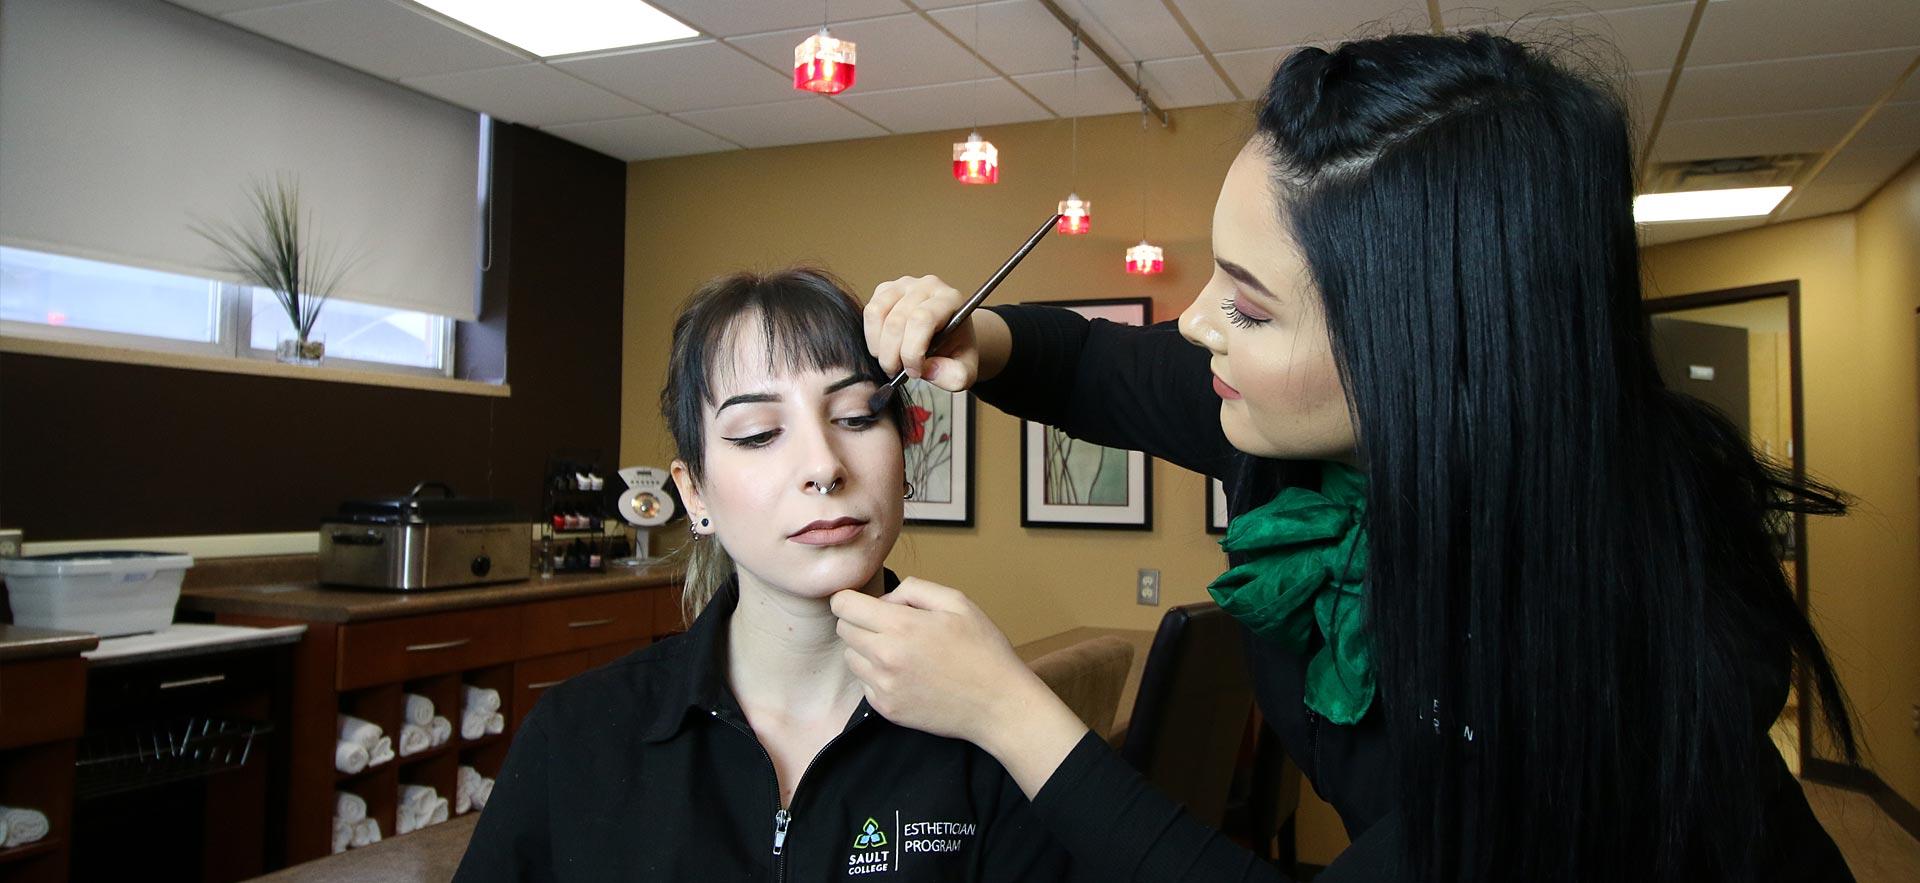 One female Esthetician student applies make-up to another Esthetician student in the ӣƵ salon spa. 